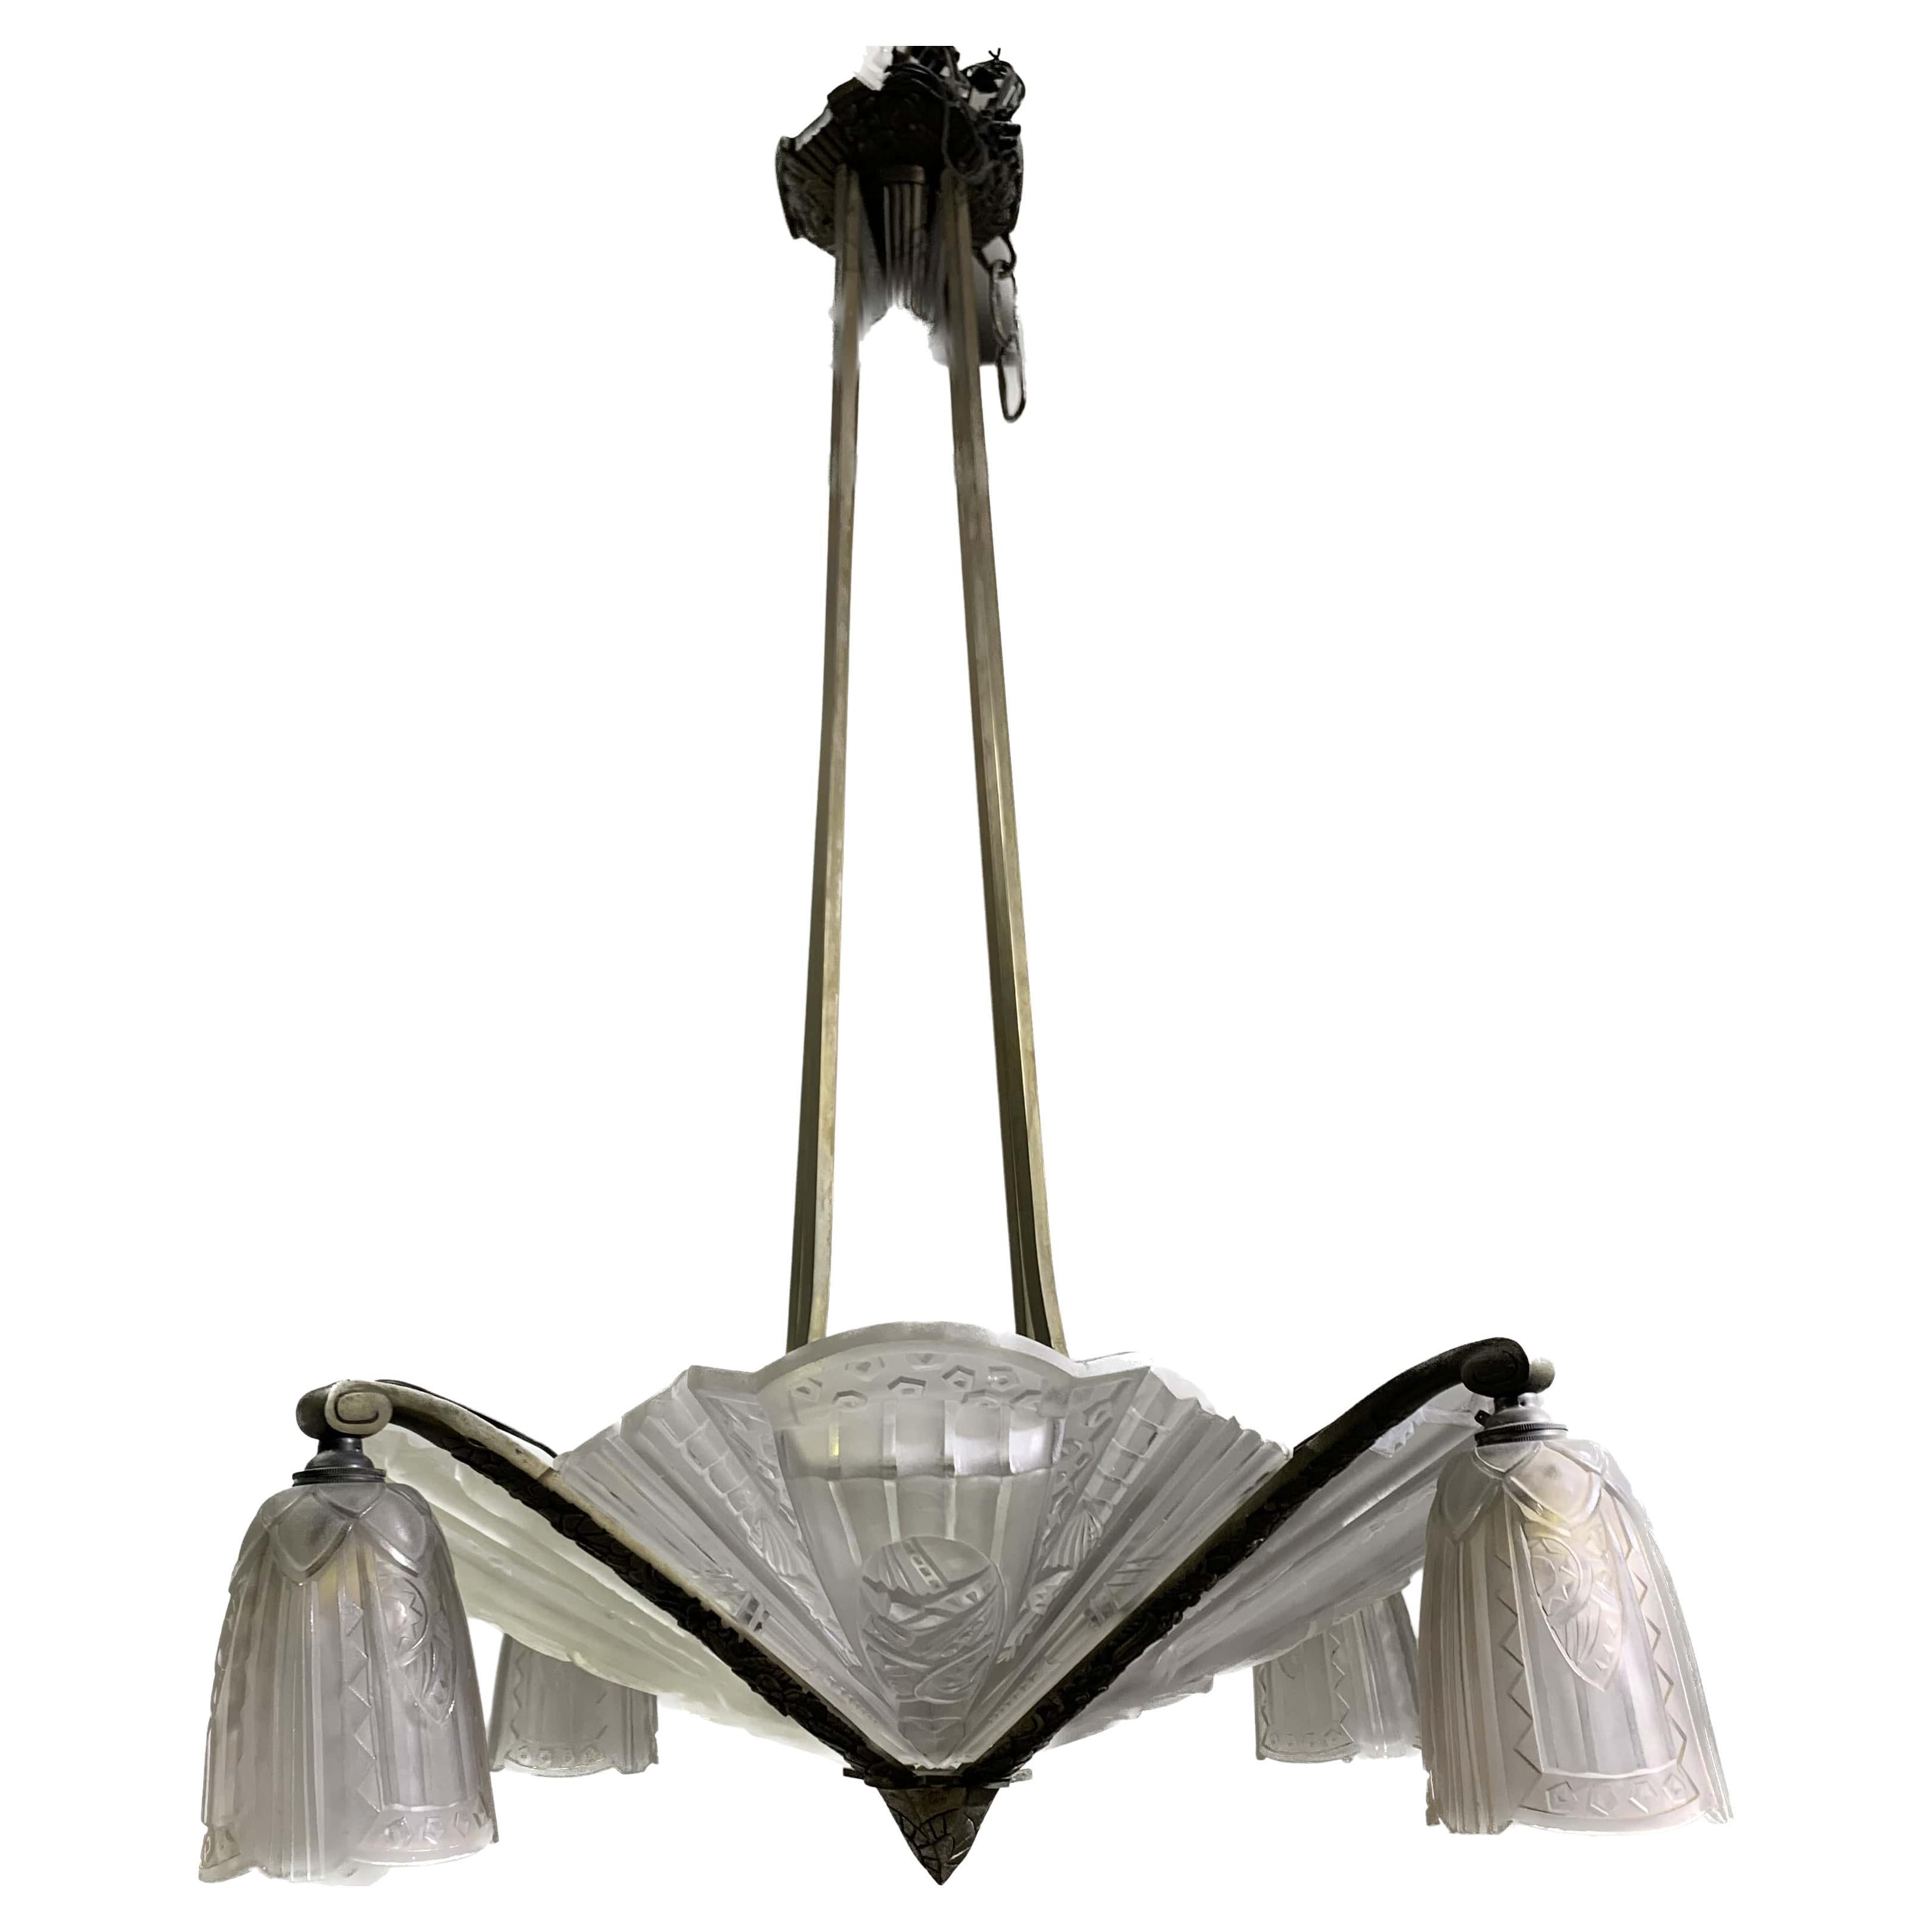 French Art Deco Chandelier circa 1930 Signed Frontisi